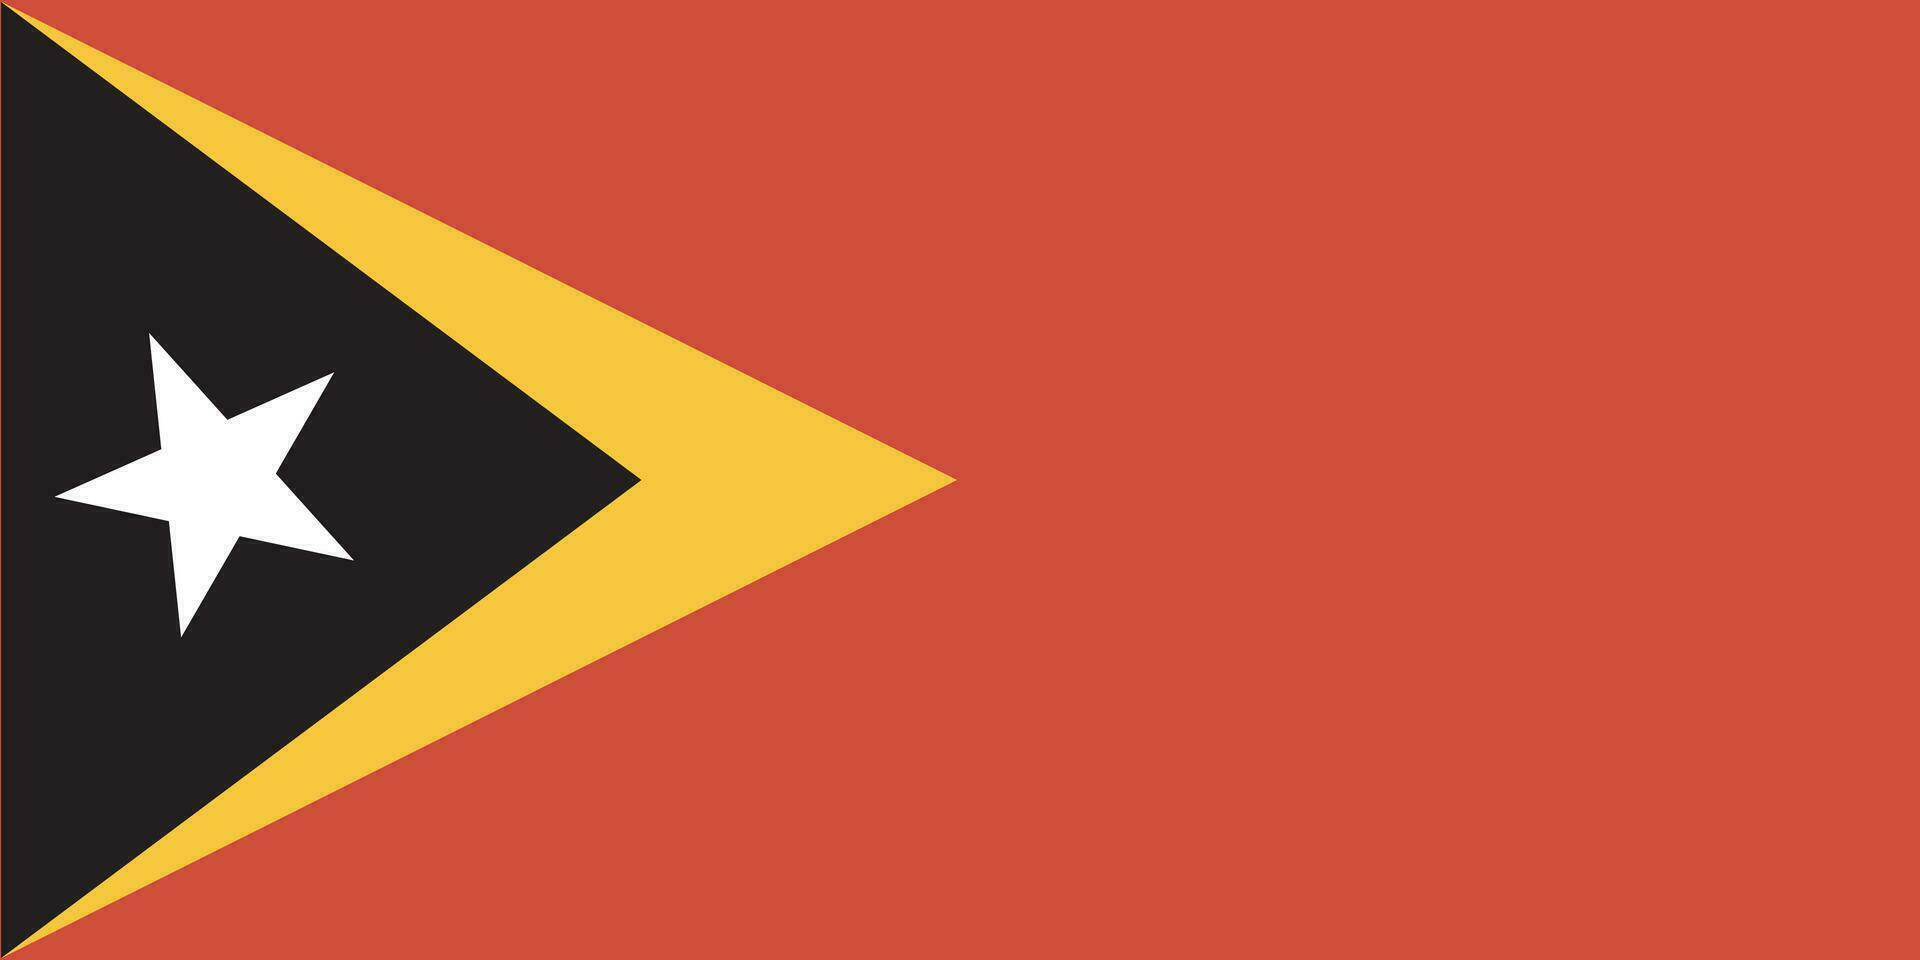 National East-Timor flag, official colors, and proportions. Vector illustration. EPS 10 Vector.